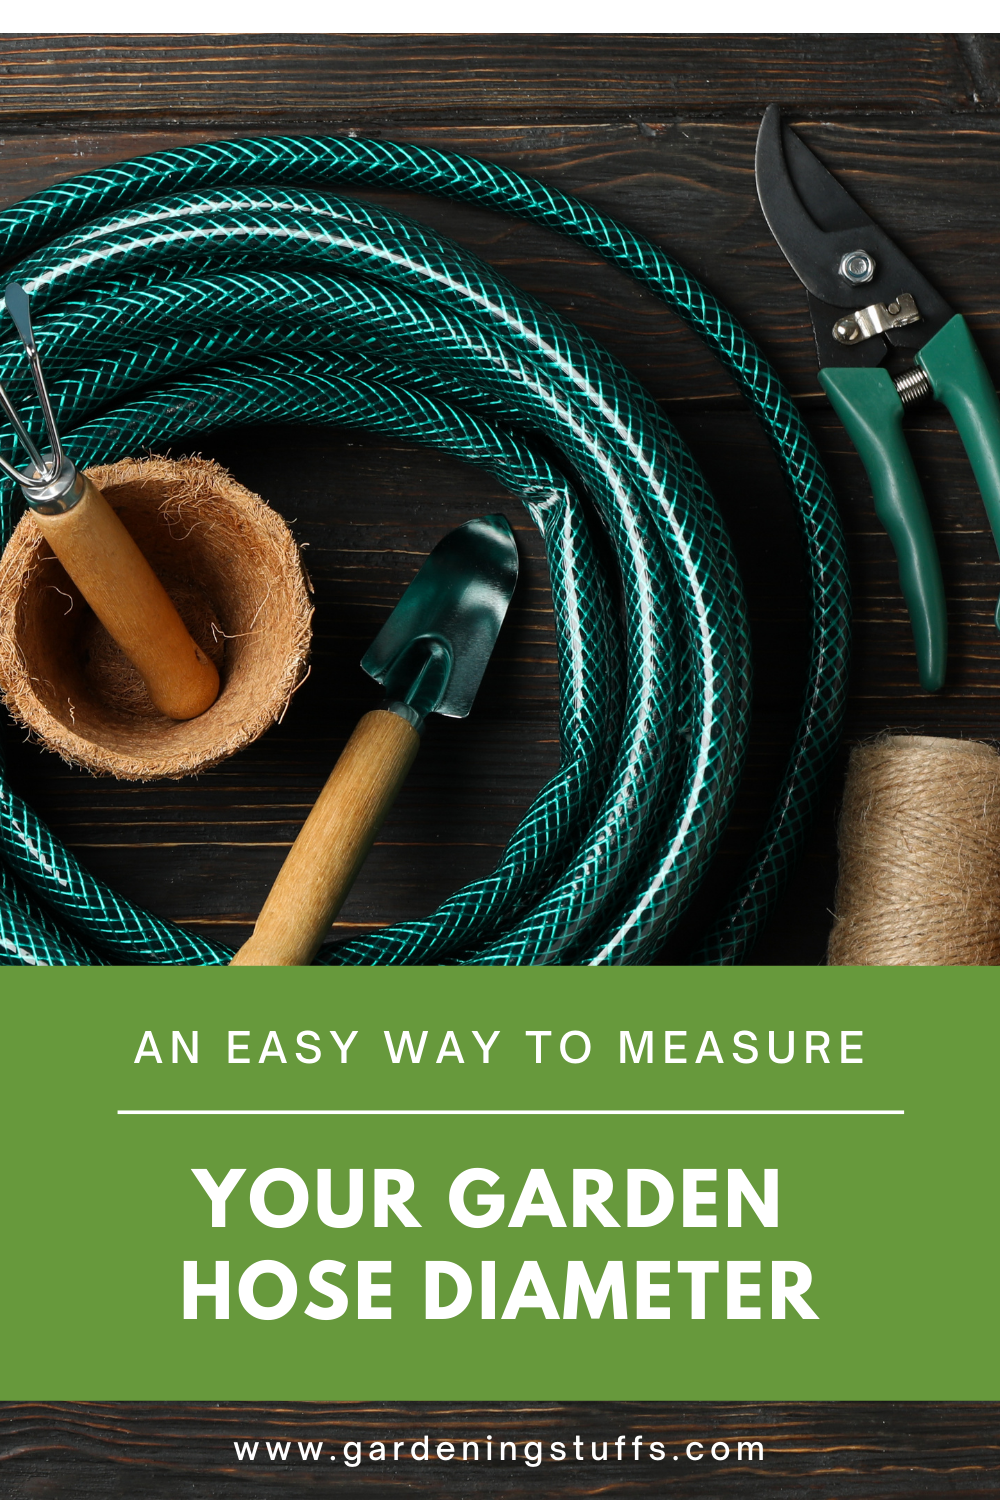 Knowing how to measure the diameter of your hose is important. Learn how to measure the diameter of your hose the easy way by following the steps.